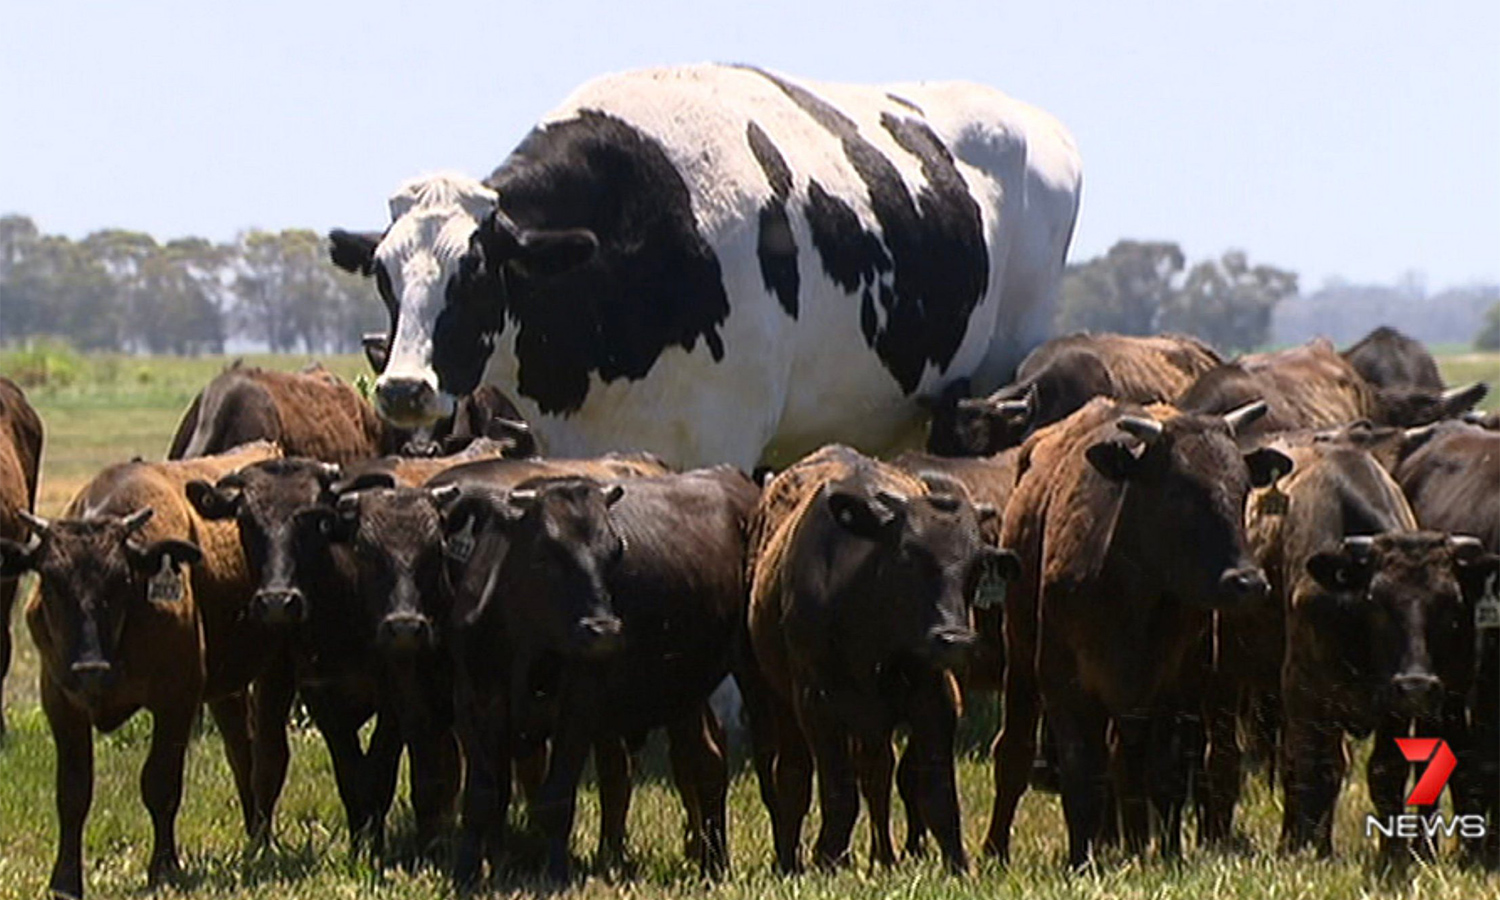 Knickers the big cow standing in a feild of other, smaller cows. A true Australian meme.